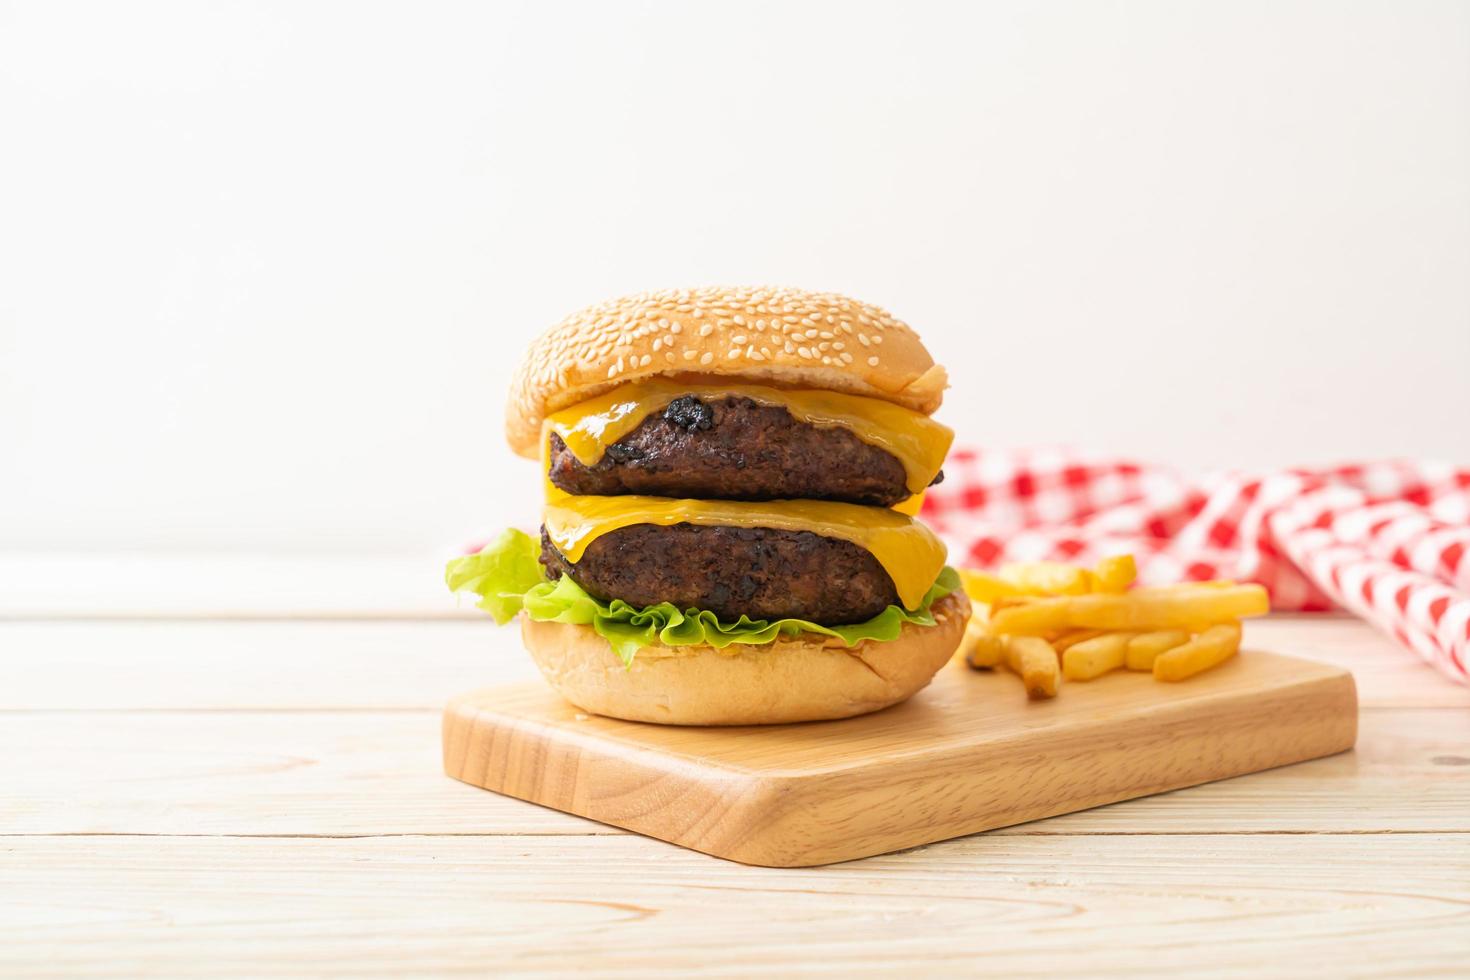 Hamburger or beef burgers with cheese and french fries - unhealthy food style photo